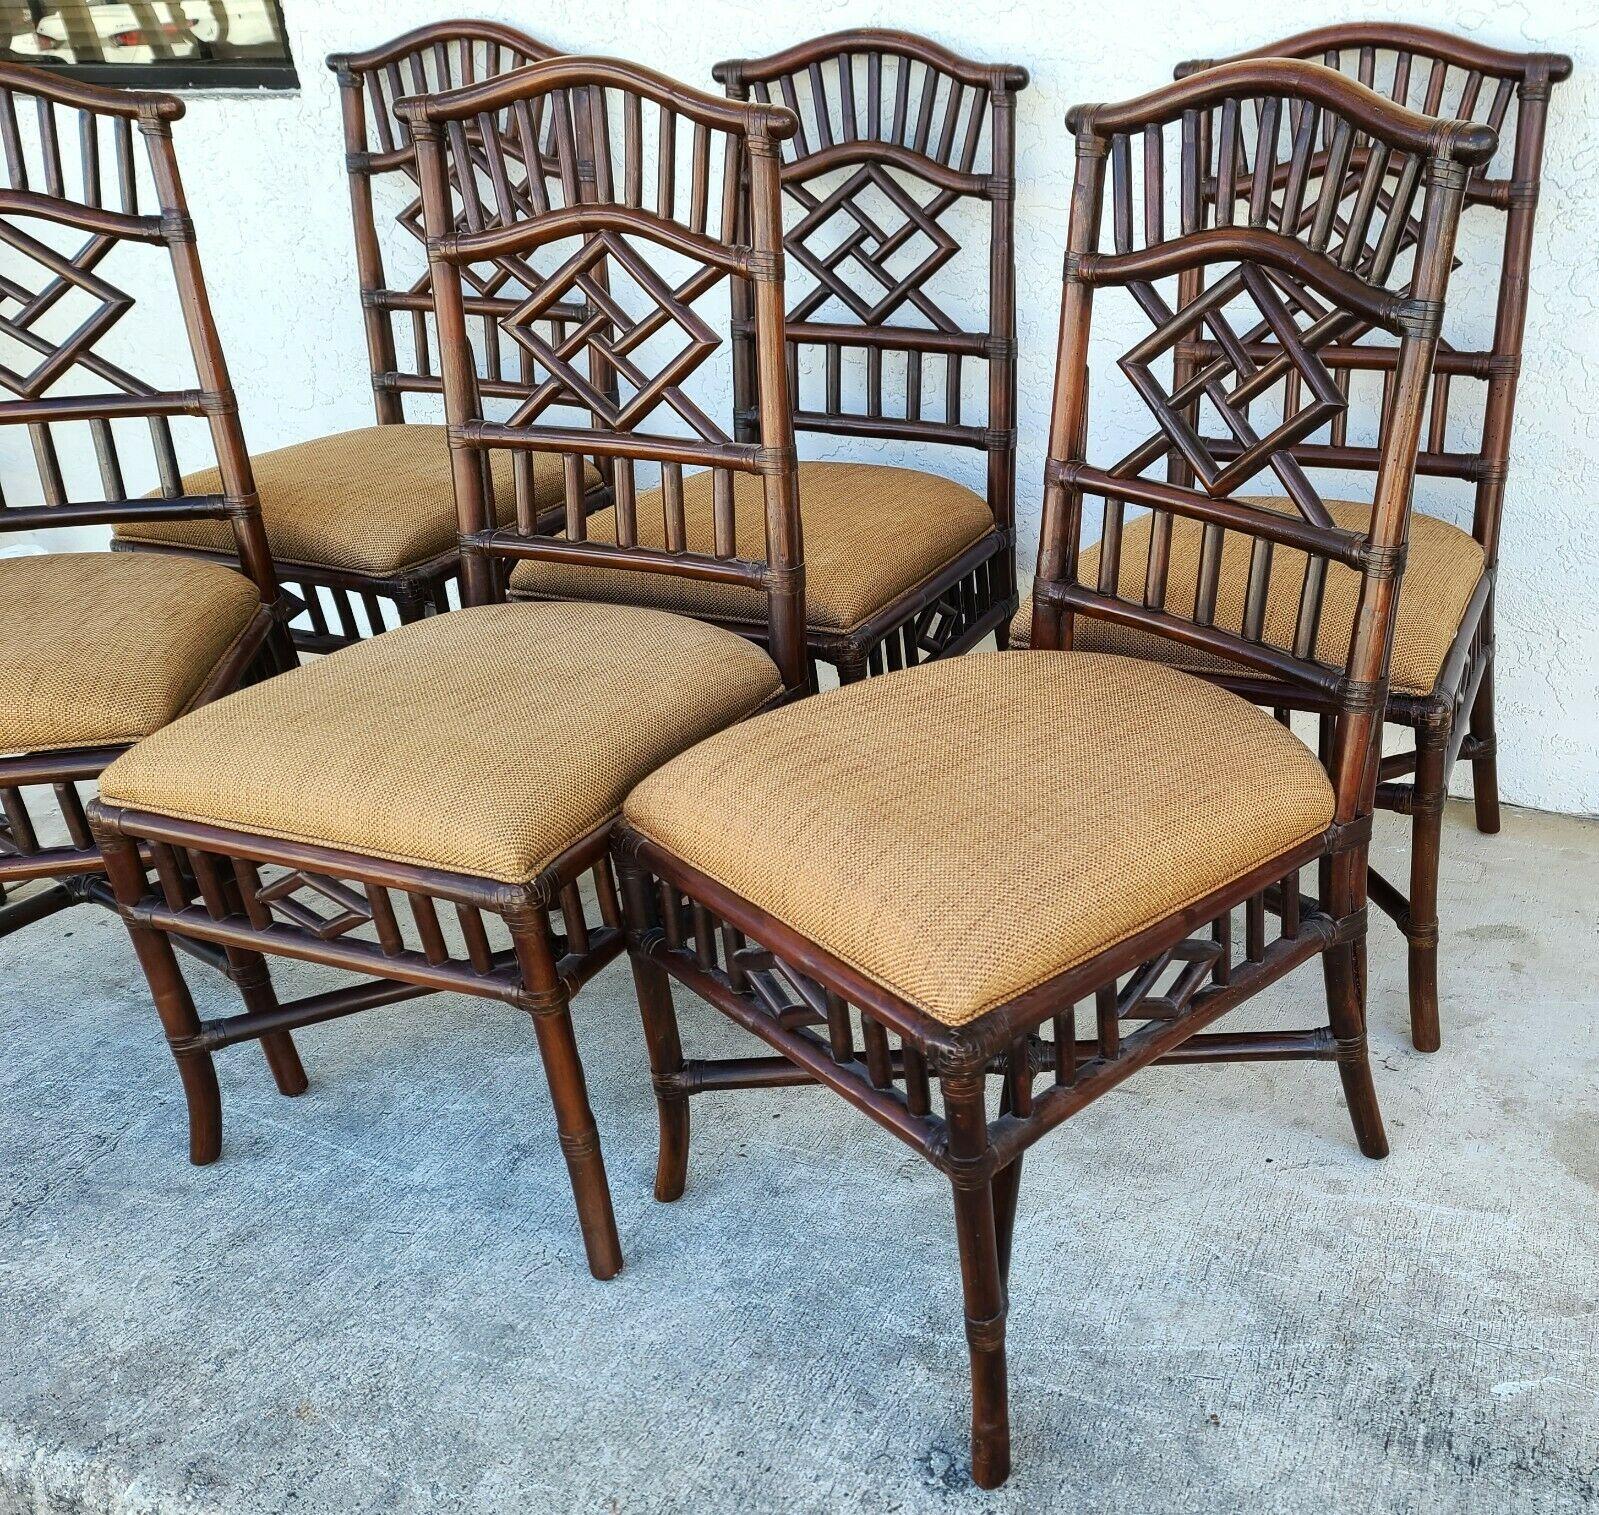 For FULL item description be sure to click on CONTINUE READING at the bottom of this listing.

Offering One Of Our Recent Palm Beach Estate Fine Furniture Acquisitions Of A Set of 6 Chinese Chippendale Bamboo Rattan Pagoda Dining Chairs by